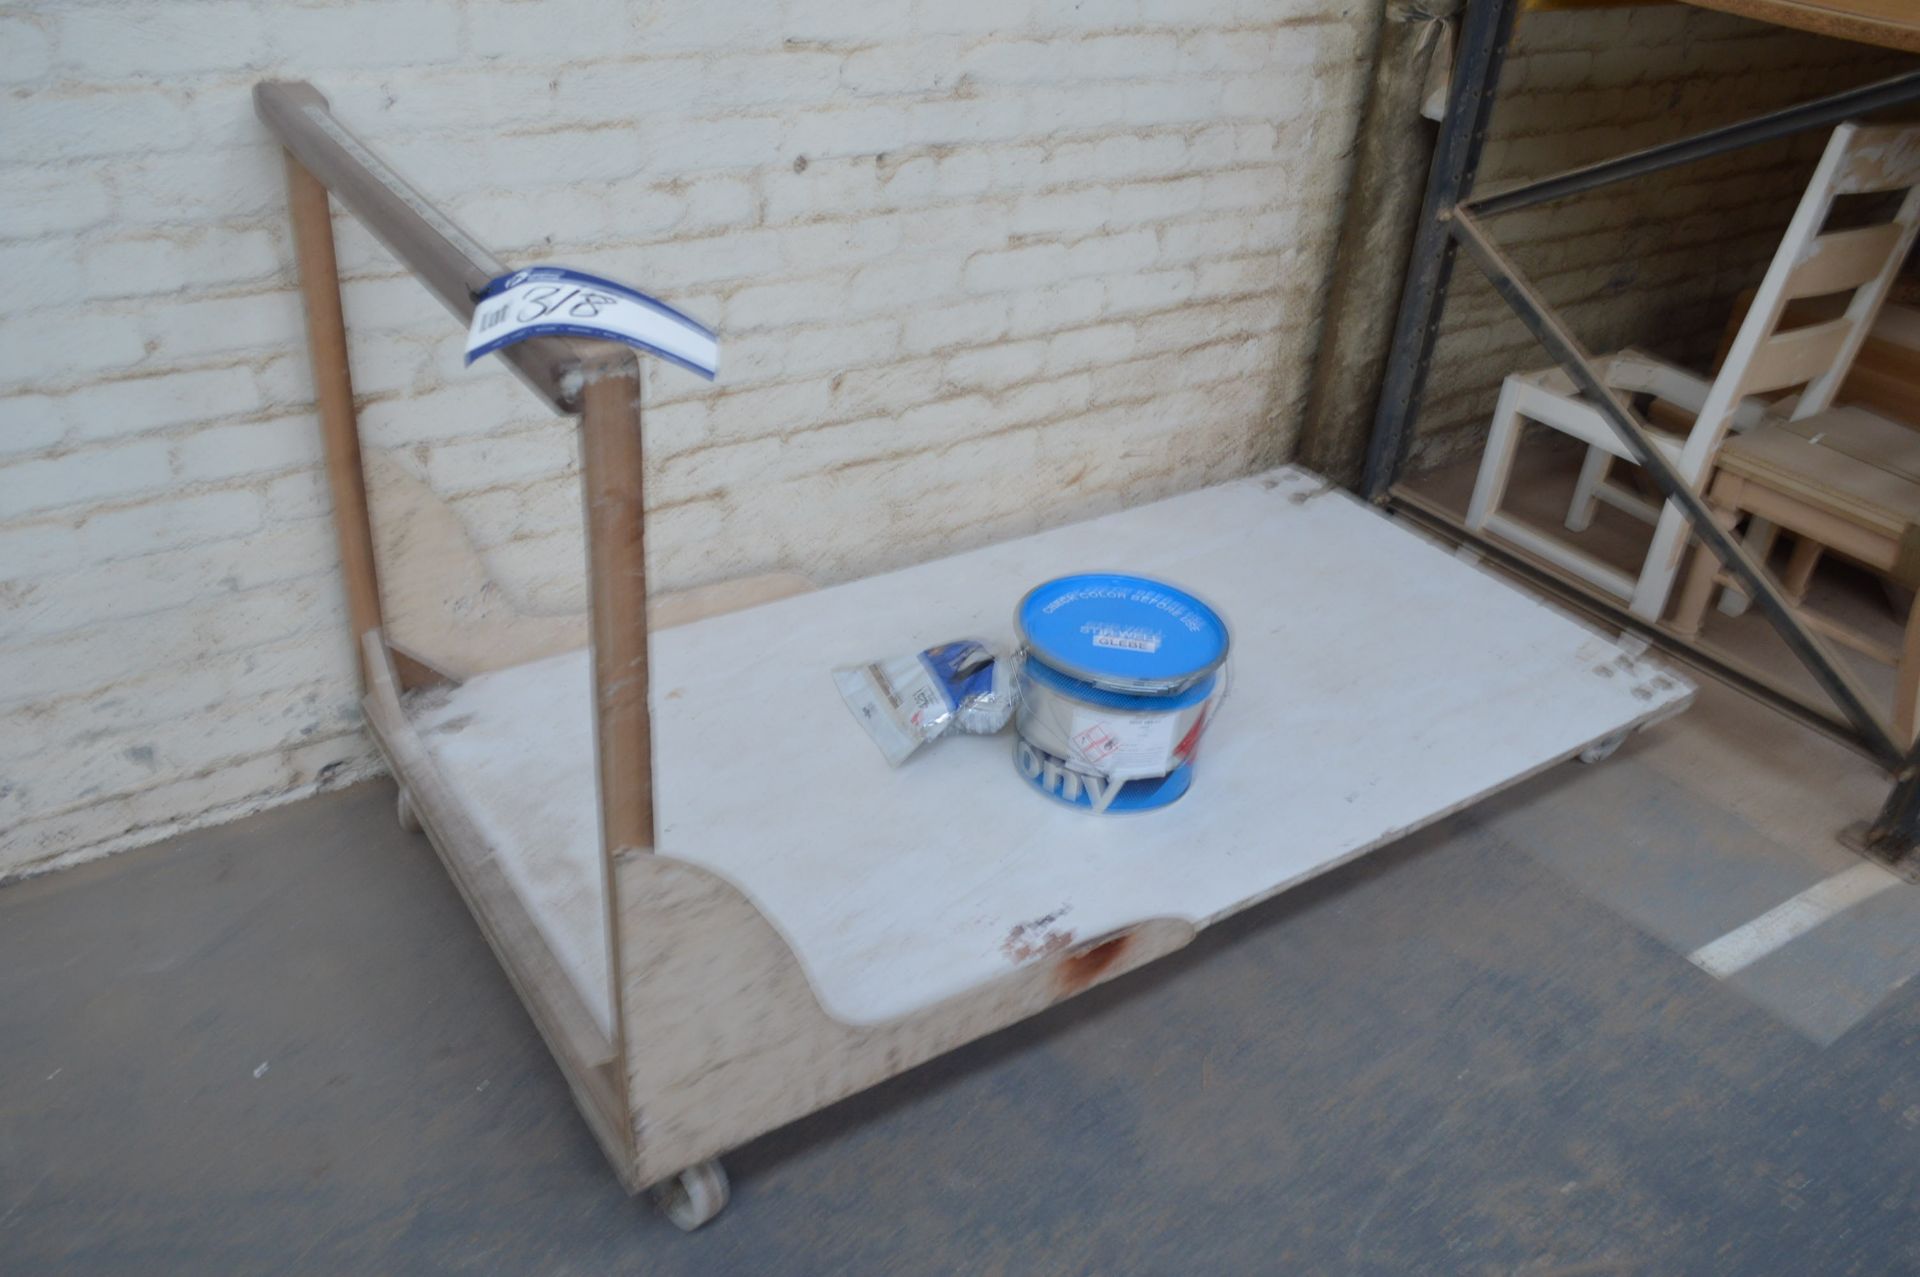 Platform Trolley, approx. 2m x 1m (contents not included)